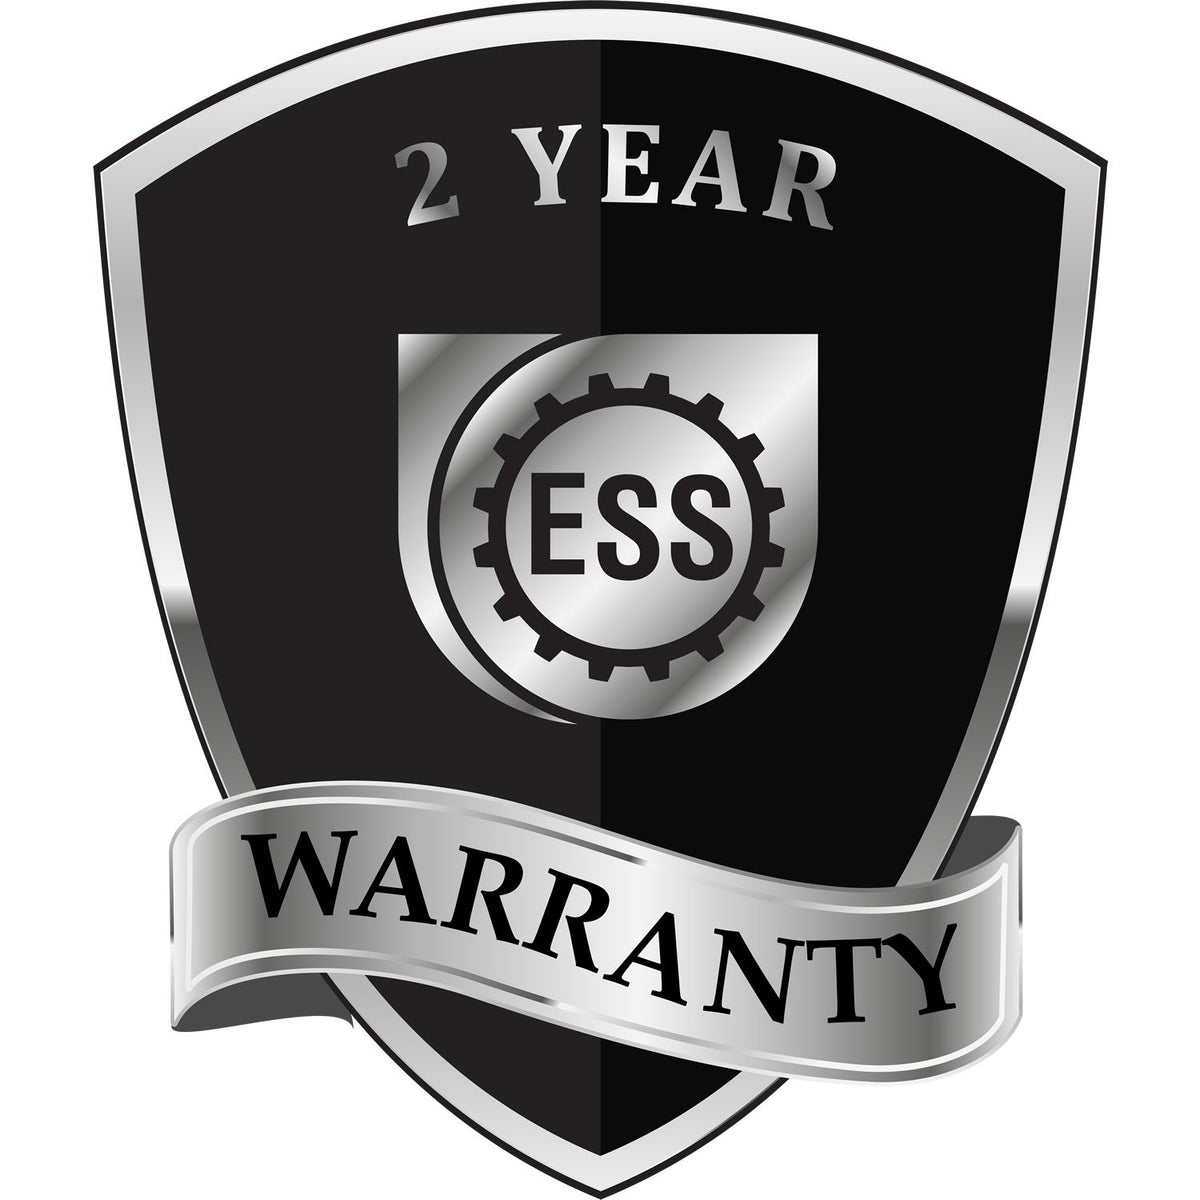 A black and silver badge or emblem showing warranty information for the Soft Oklahoma Professional Geologist Seal